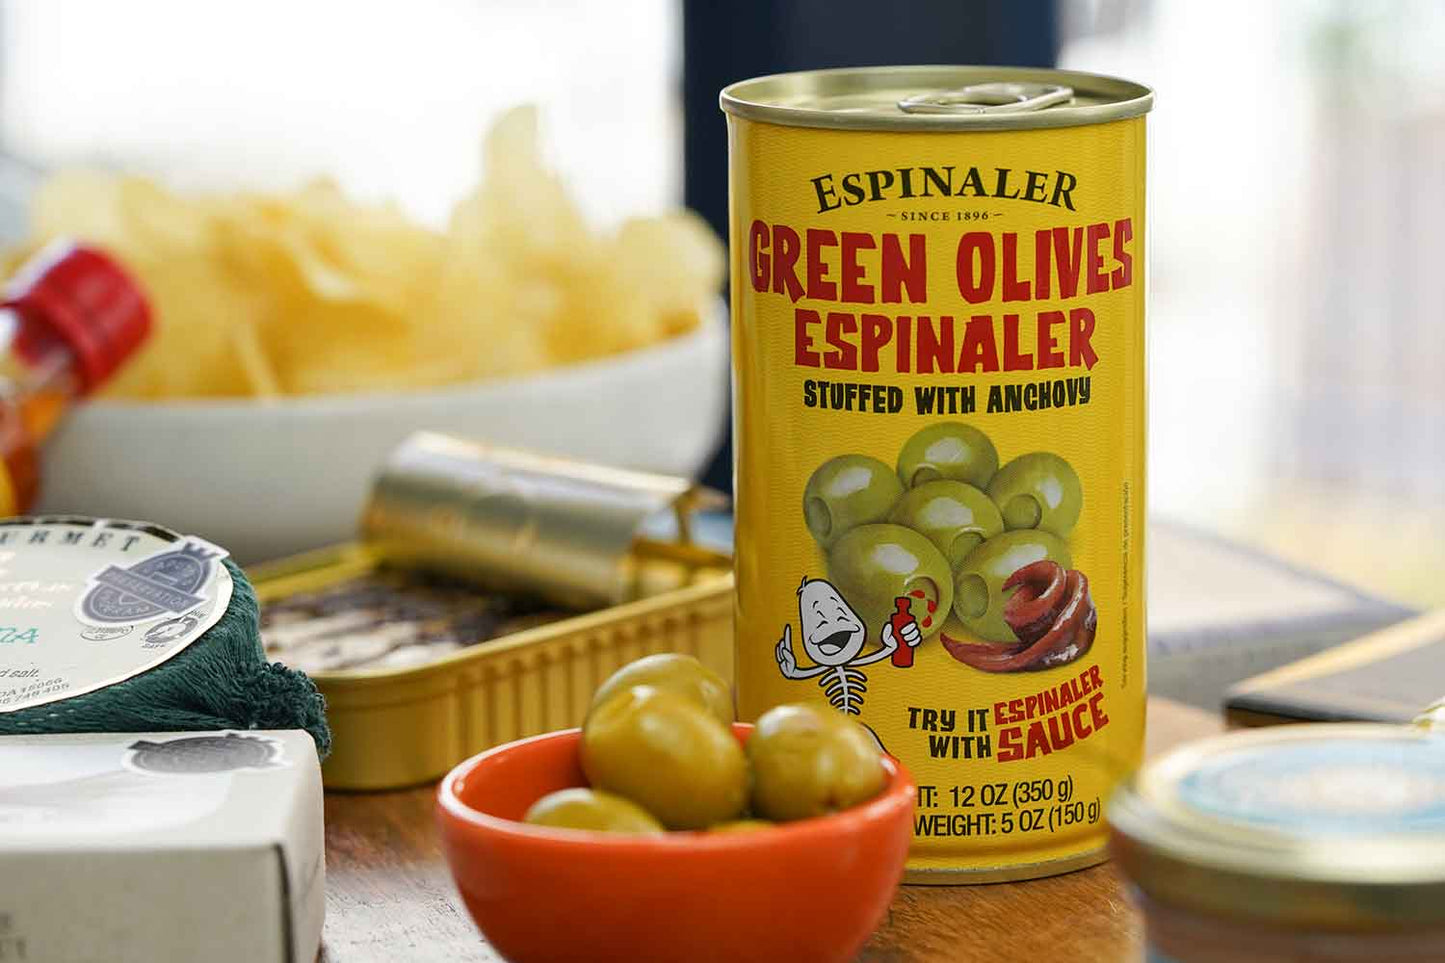 Espinaler Olives Stuffed with Anchovy, Spain (12oz)